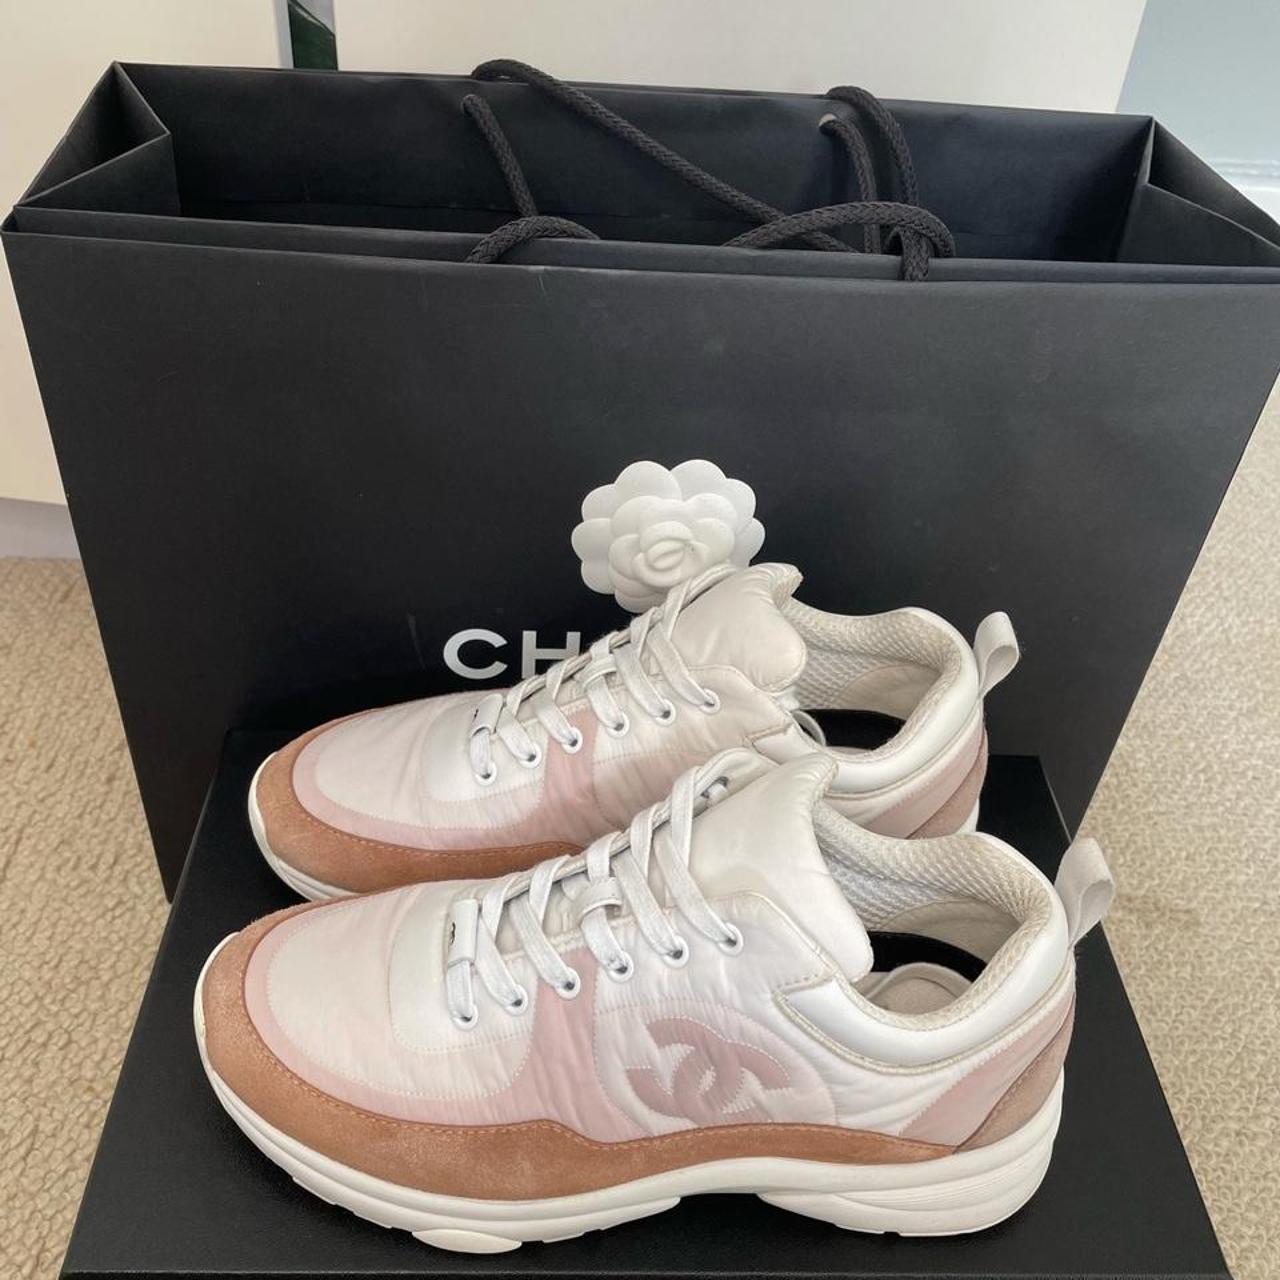 Blush pink Chanel CC Nylon Runners., Comes with box 